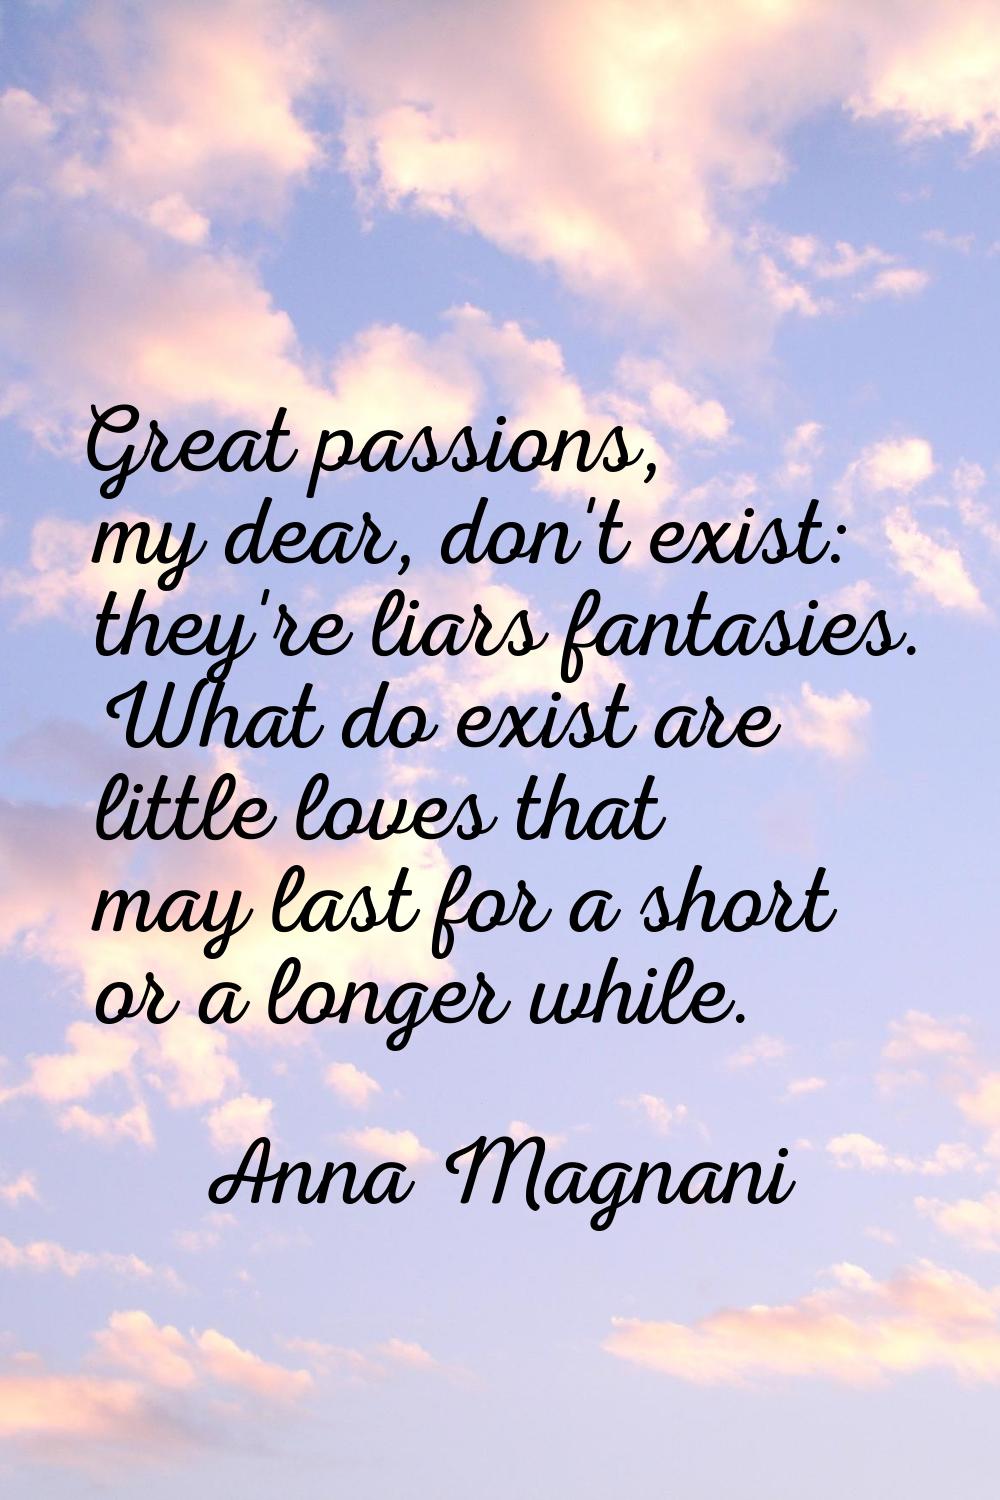 Great passions, my dear, don't exist: they're liars fantasies. What do exist are little loves that 